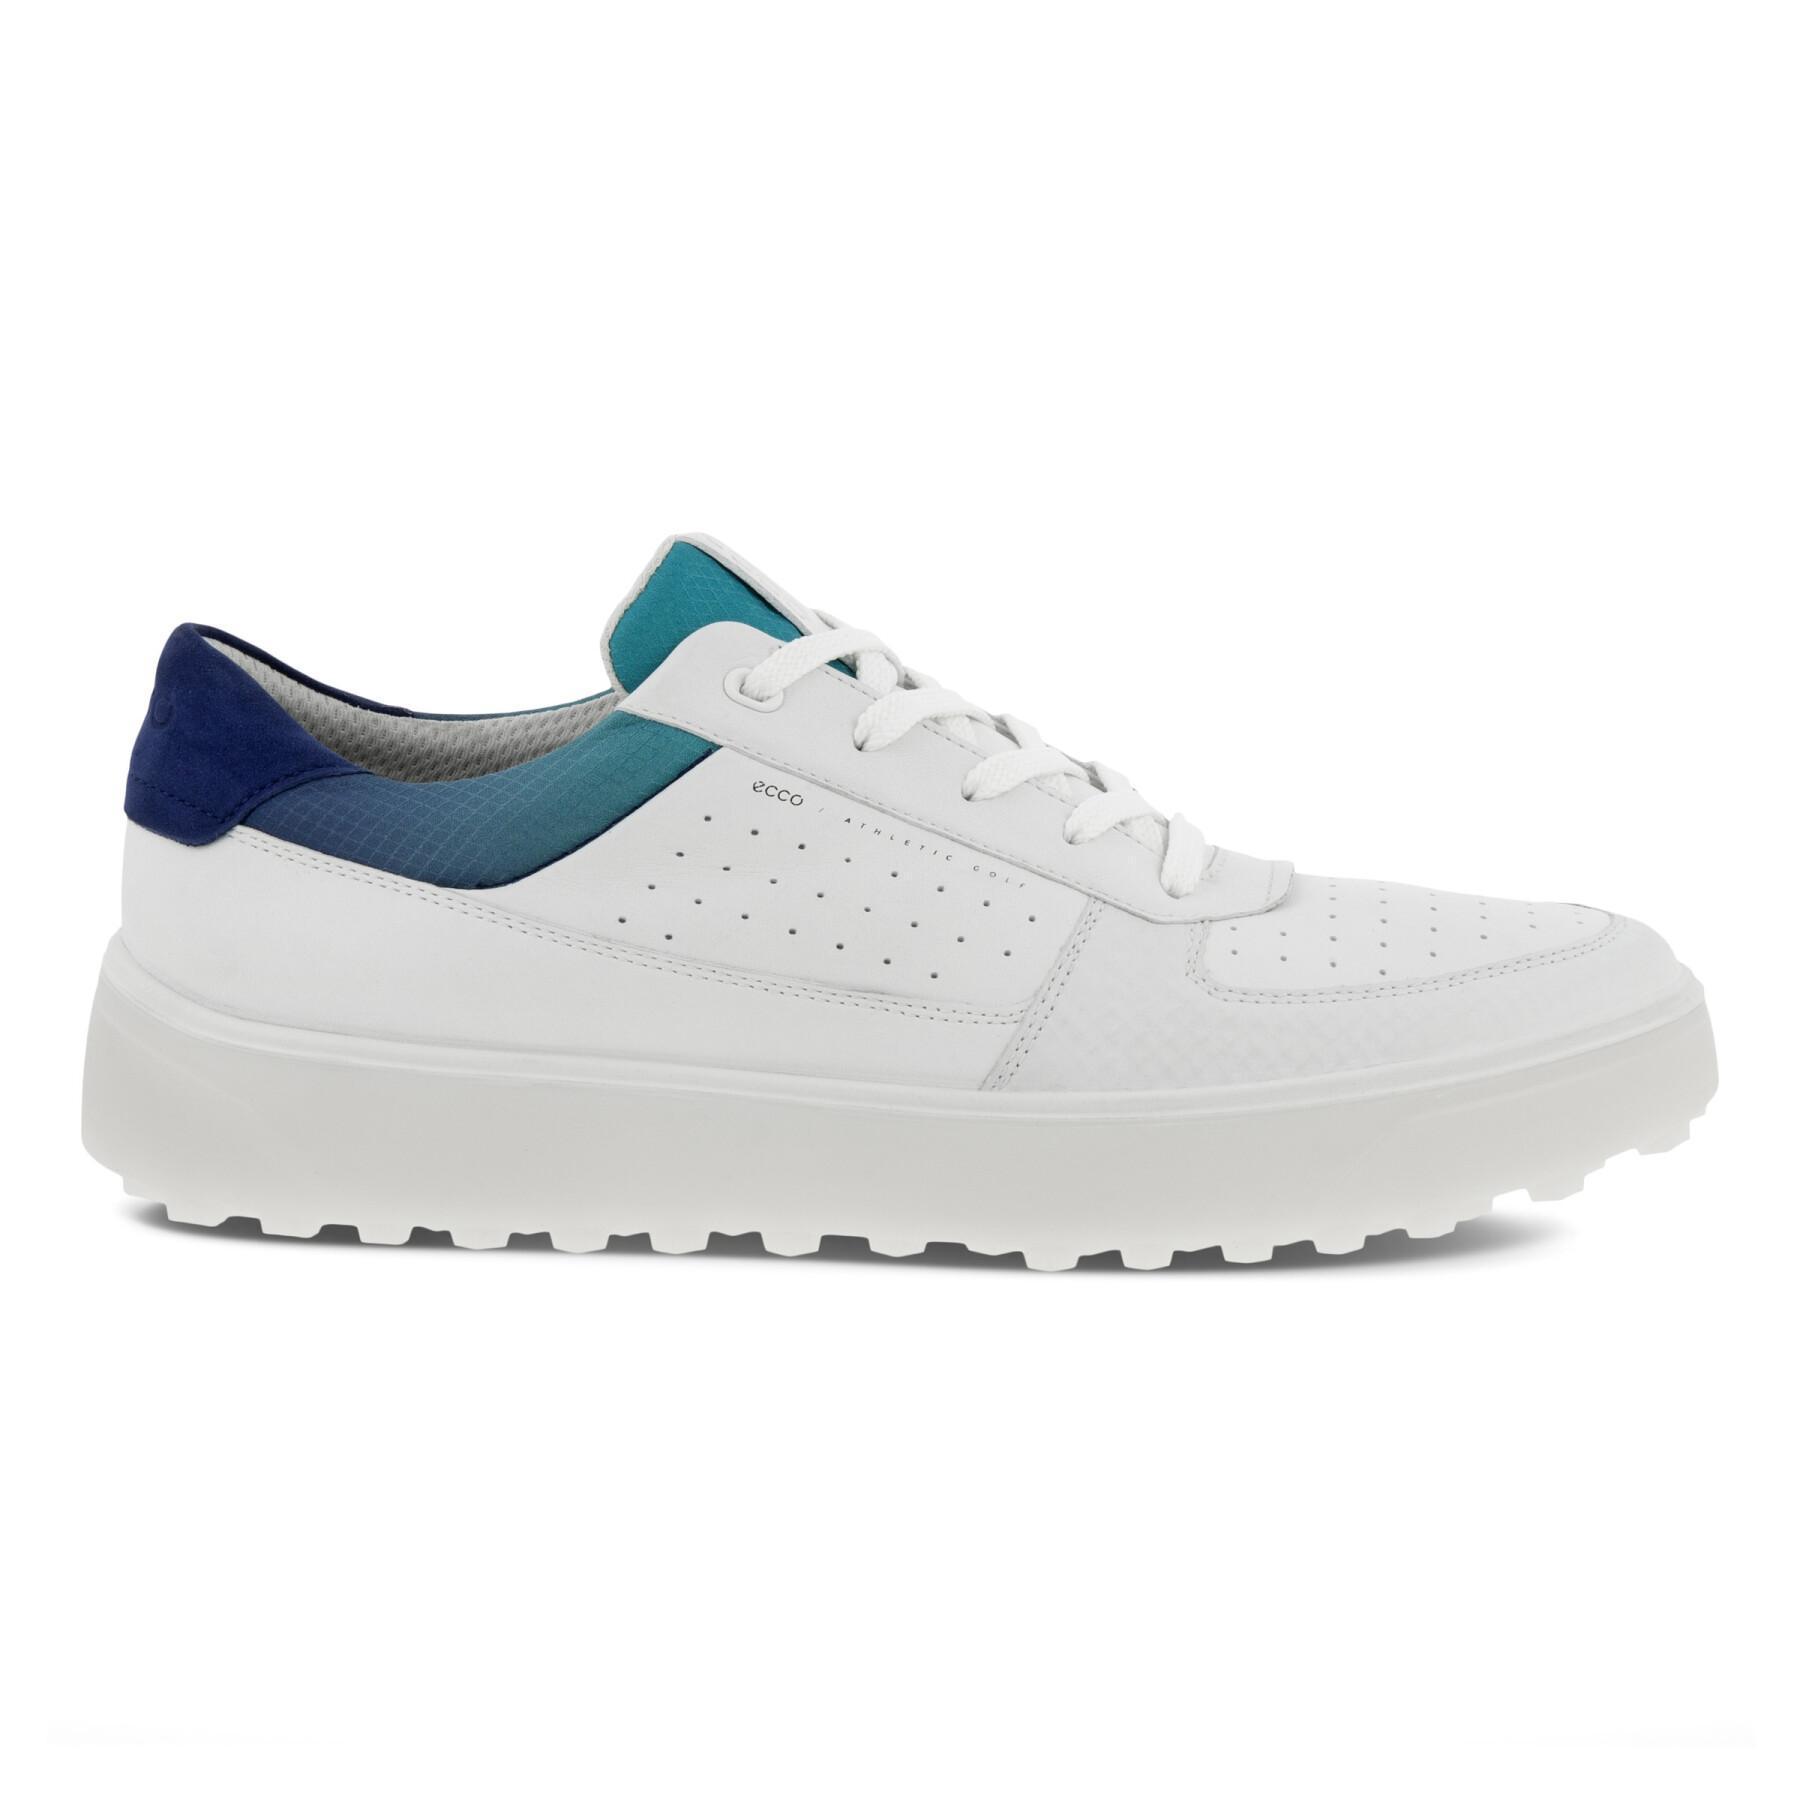 Spikeless golf shoes Ecco Tray